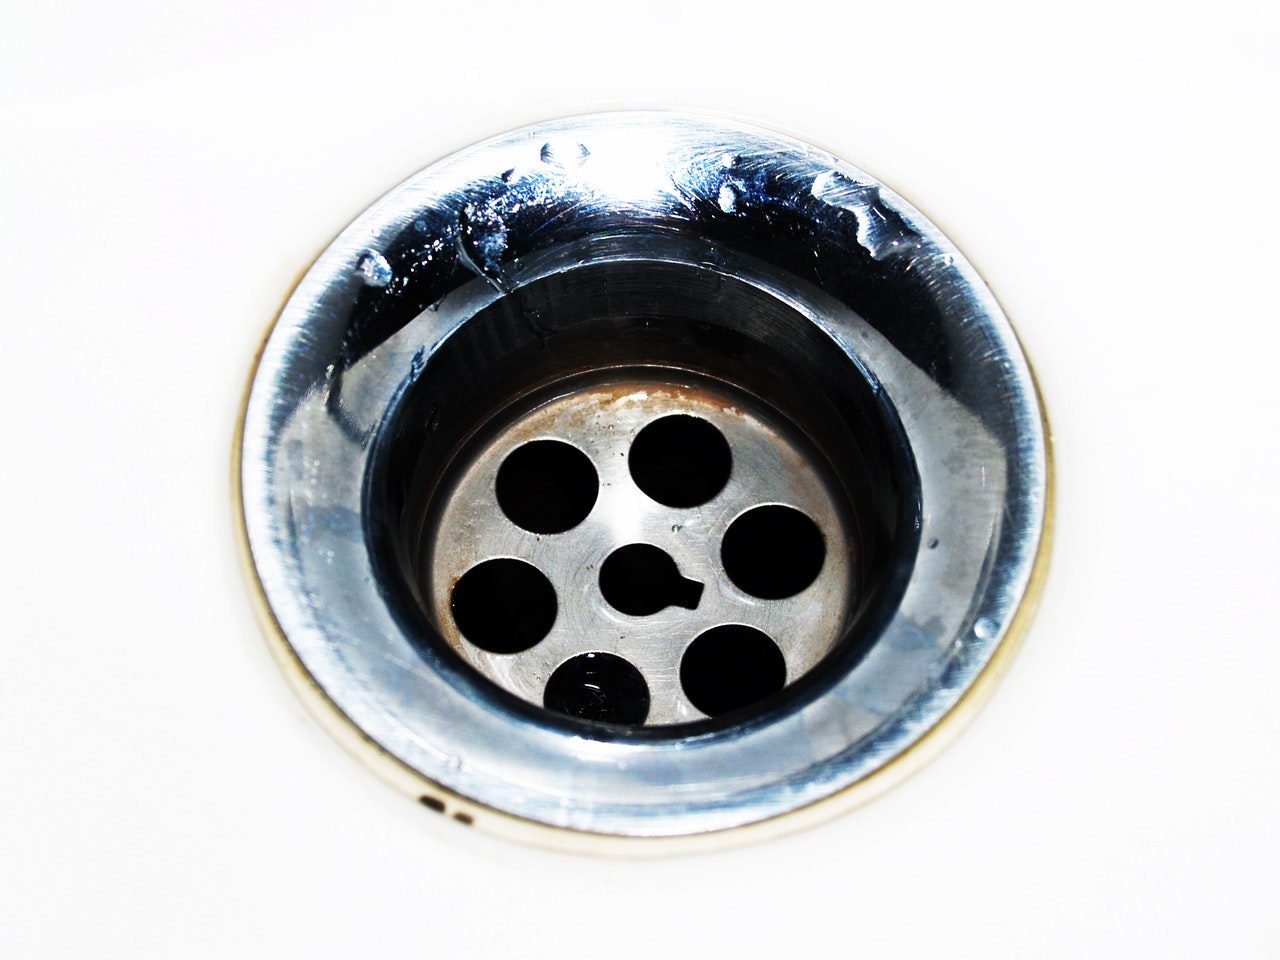 5 reasons why your sink won't drain: and how to fix it